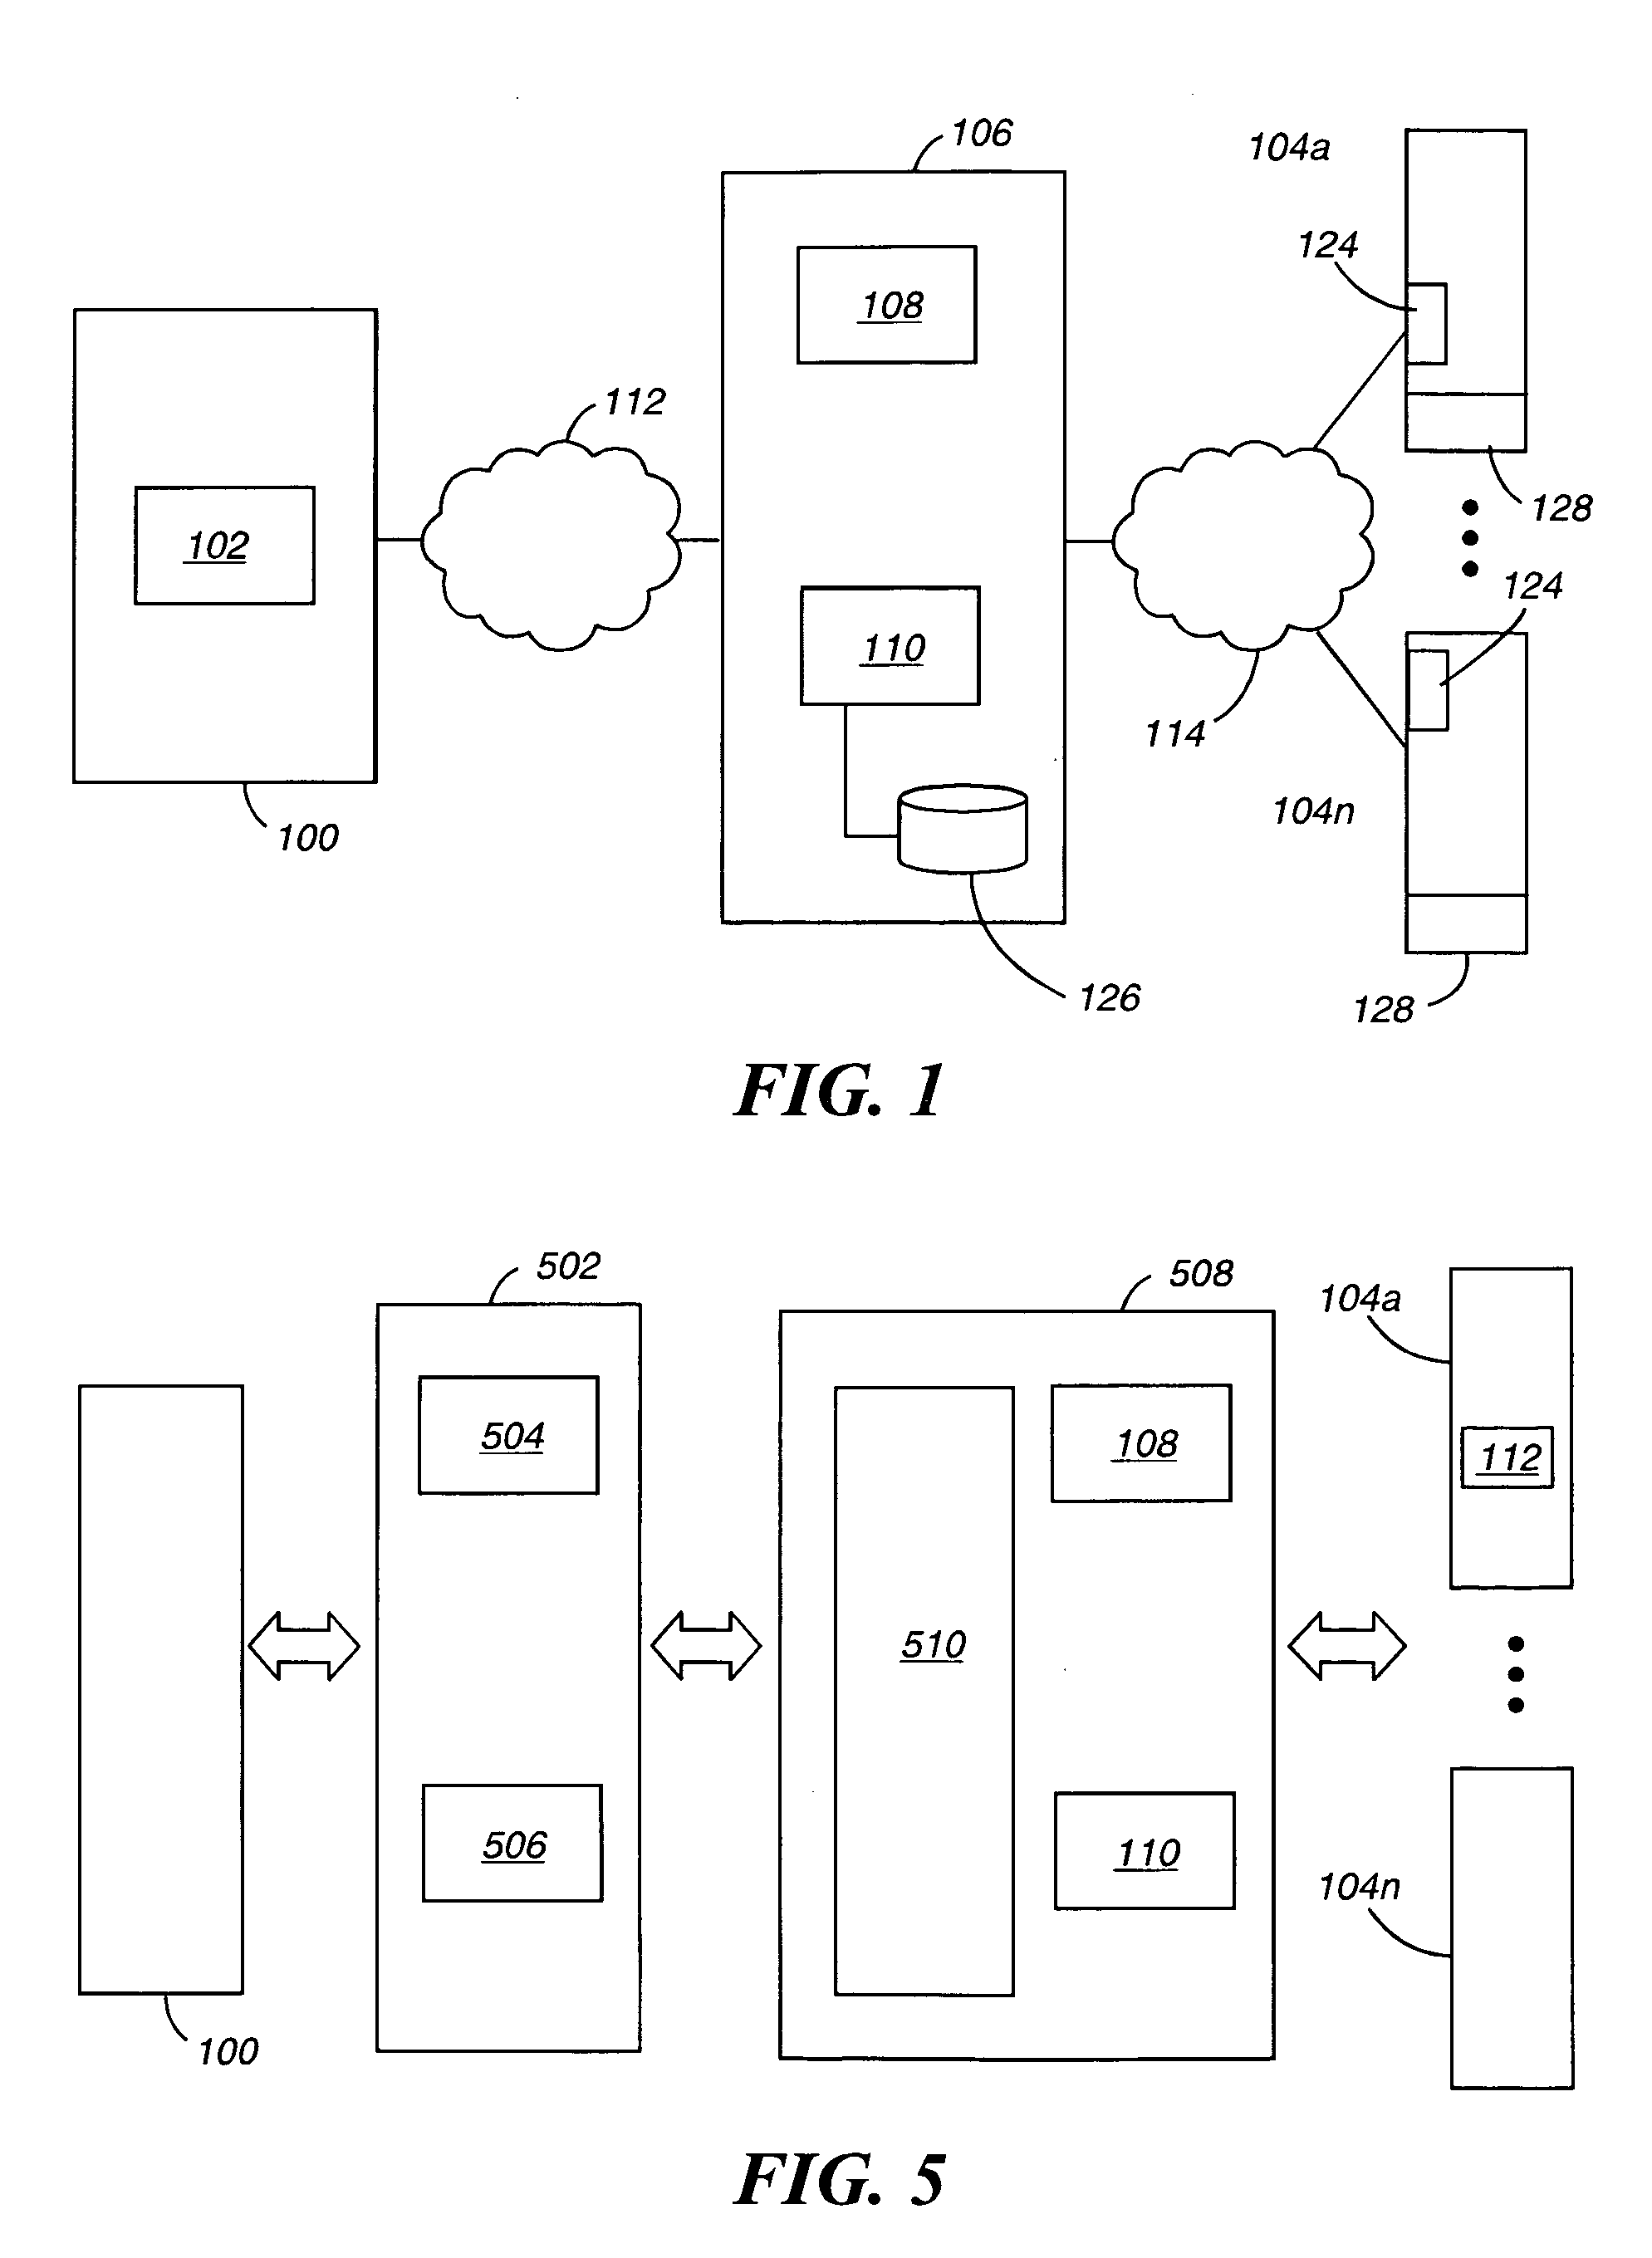 Method and system of enabling intelligent and lightweight speech to text transcription through distributed environment